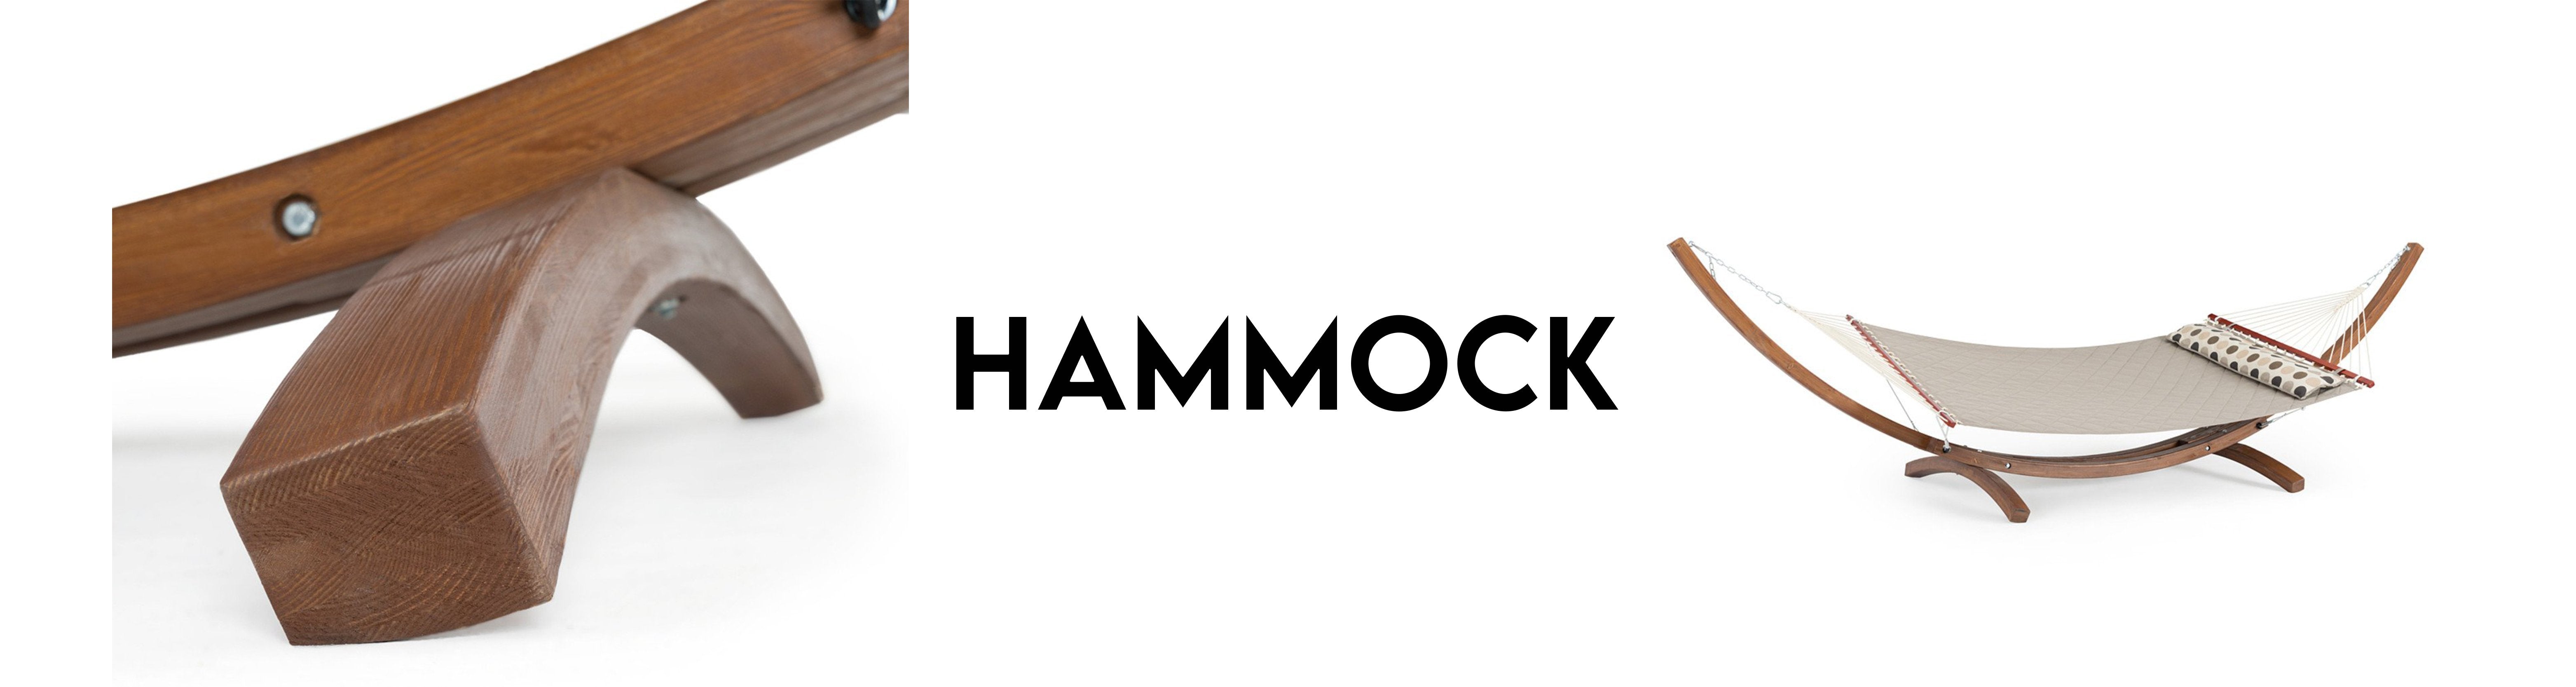 Hammock - Recreation Outfitters